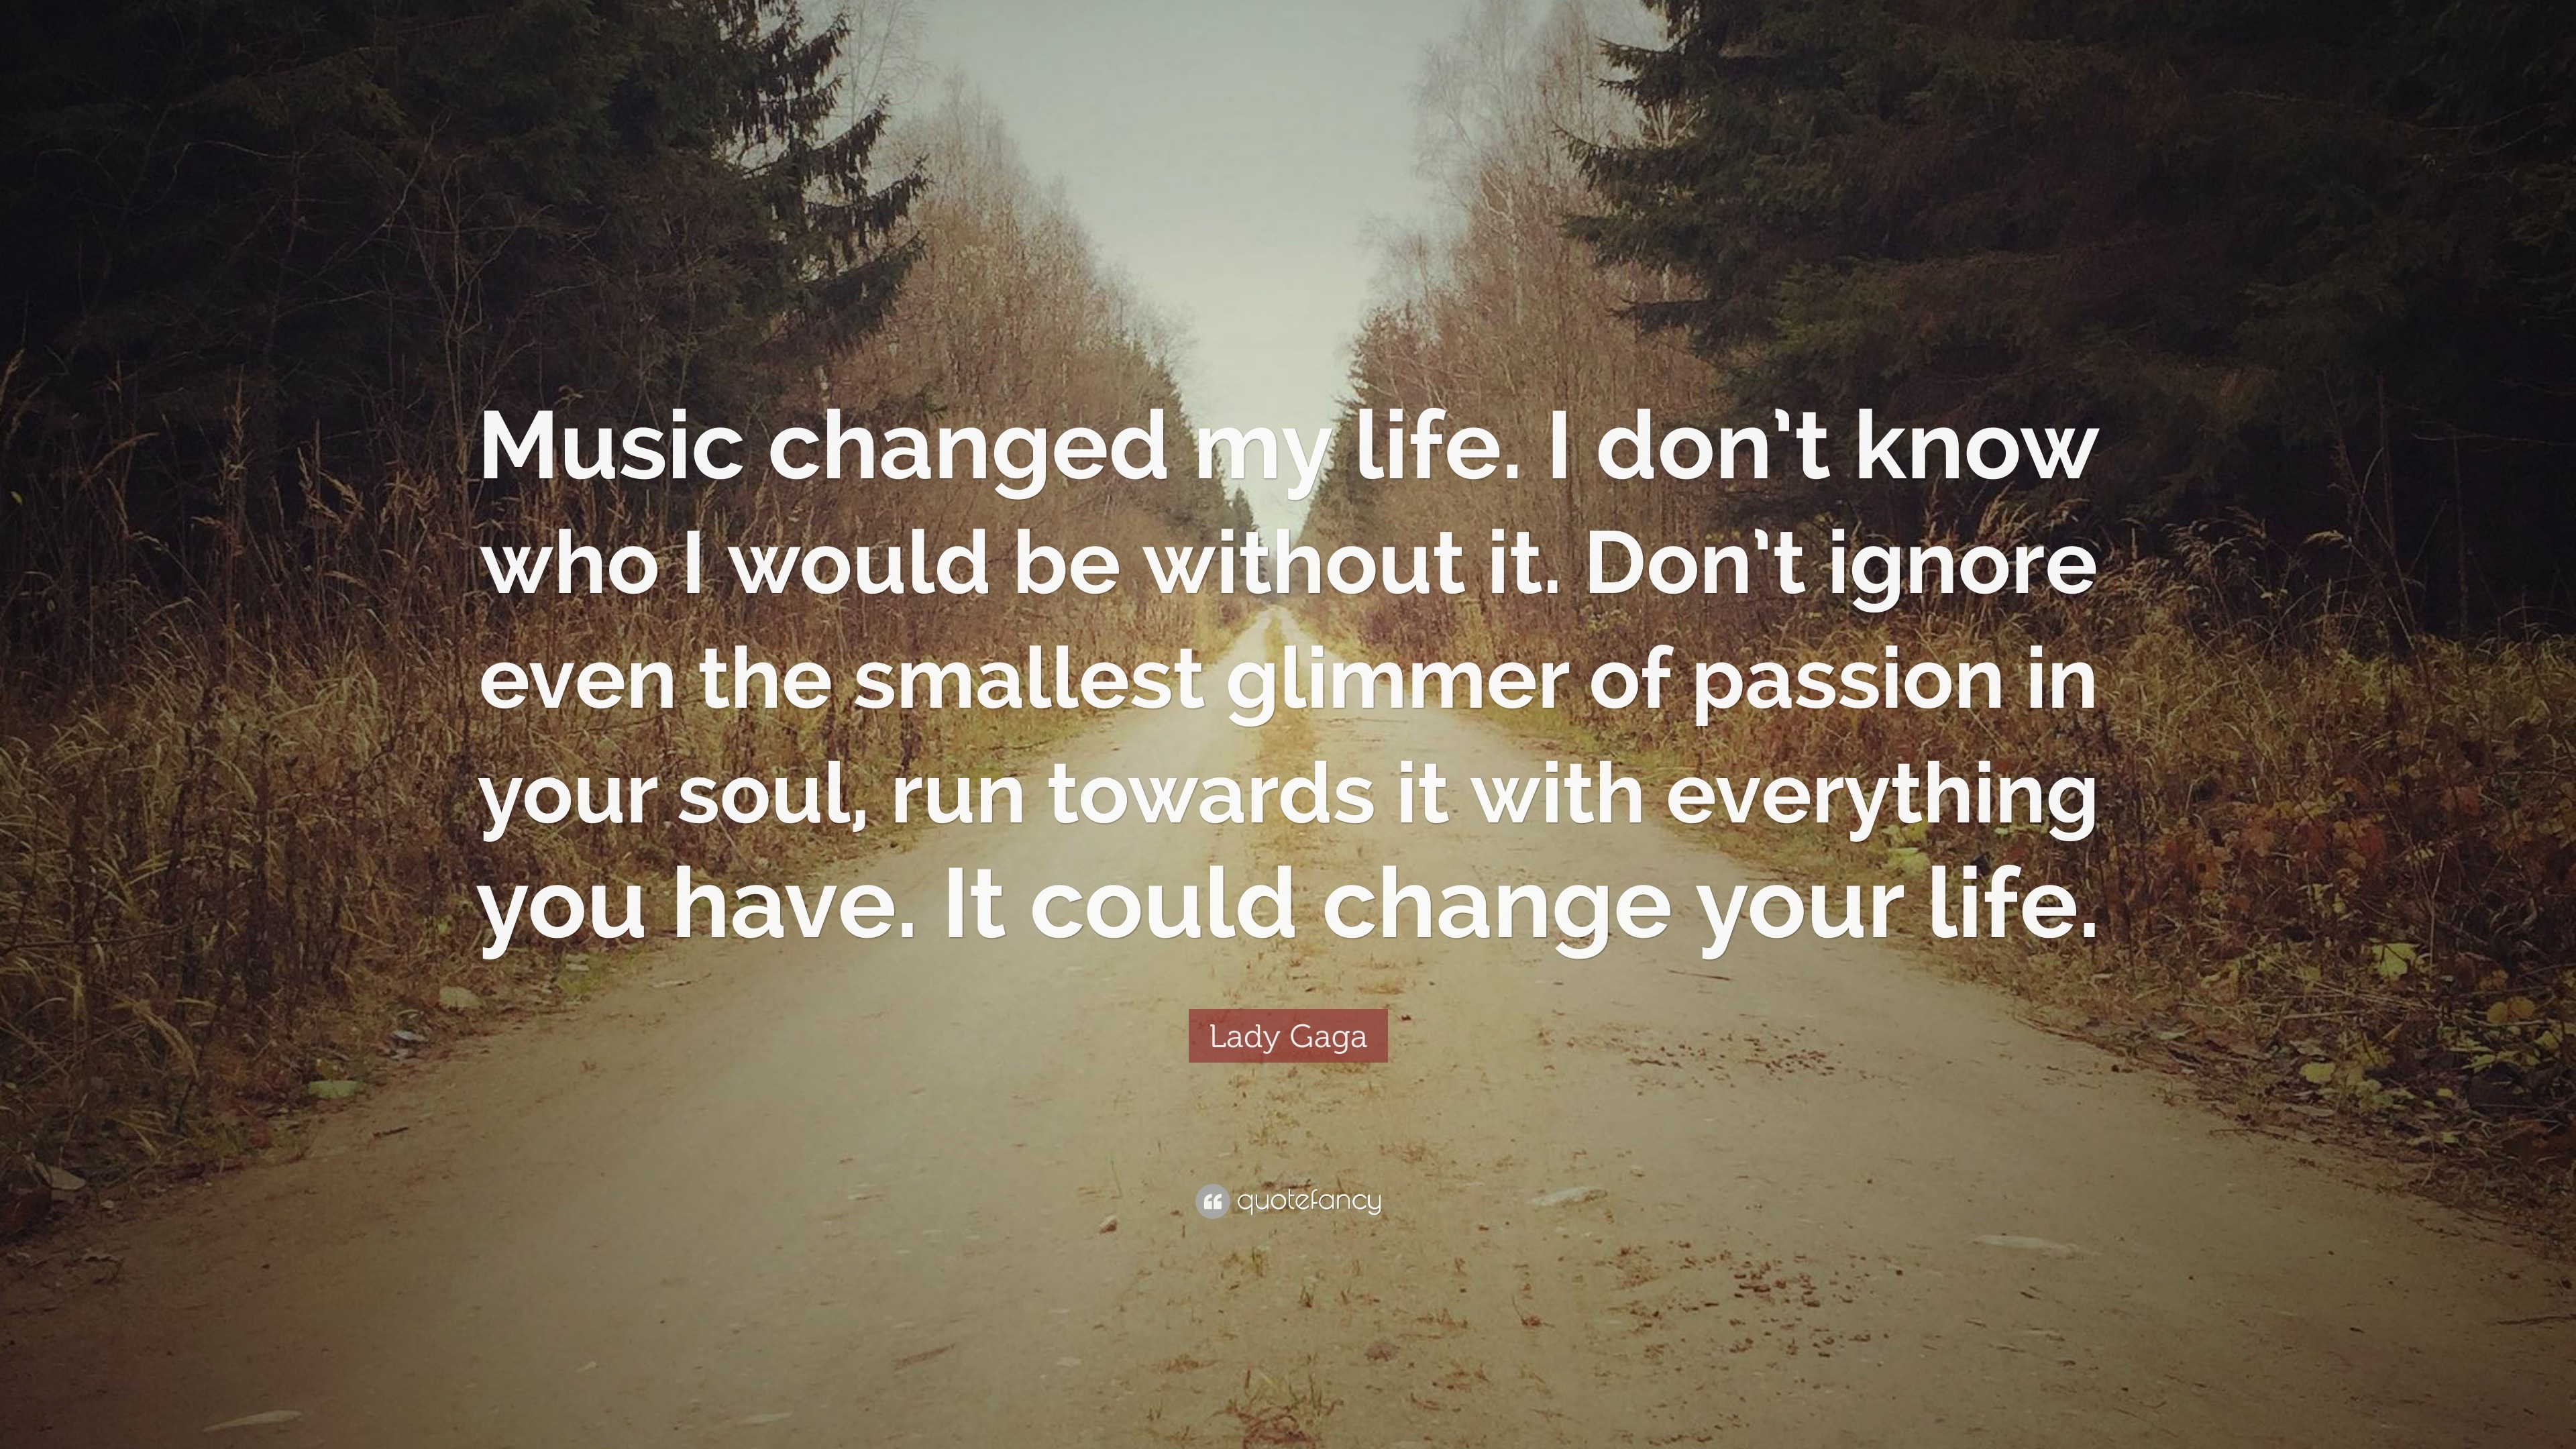 essay on how music changed my life